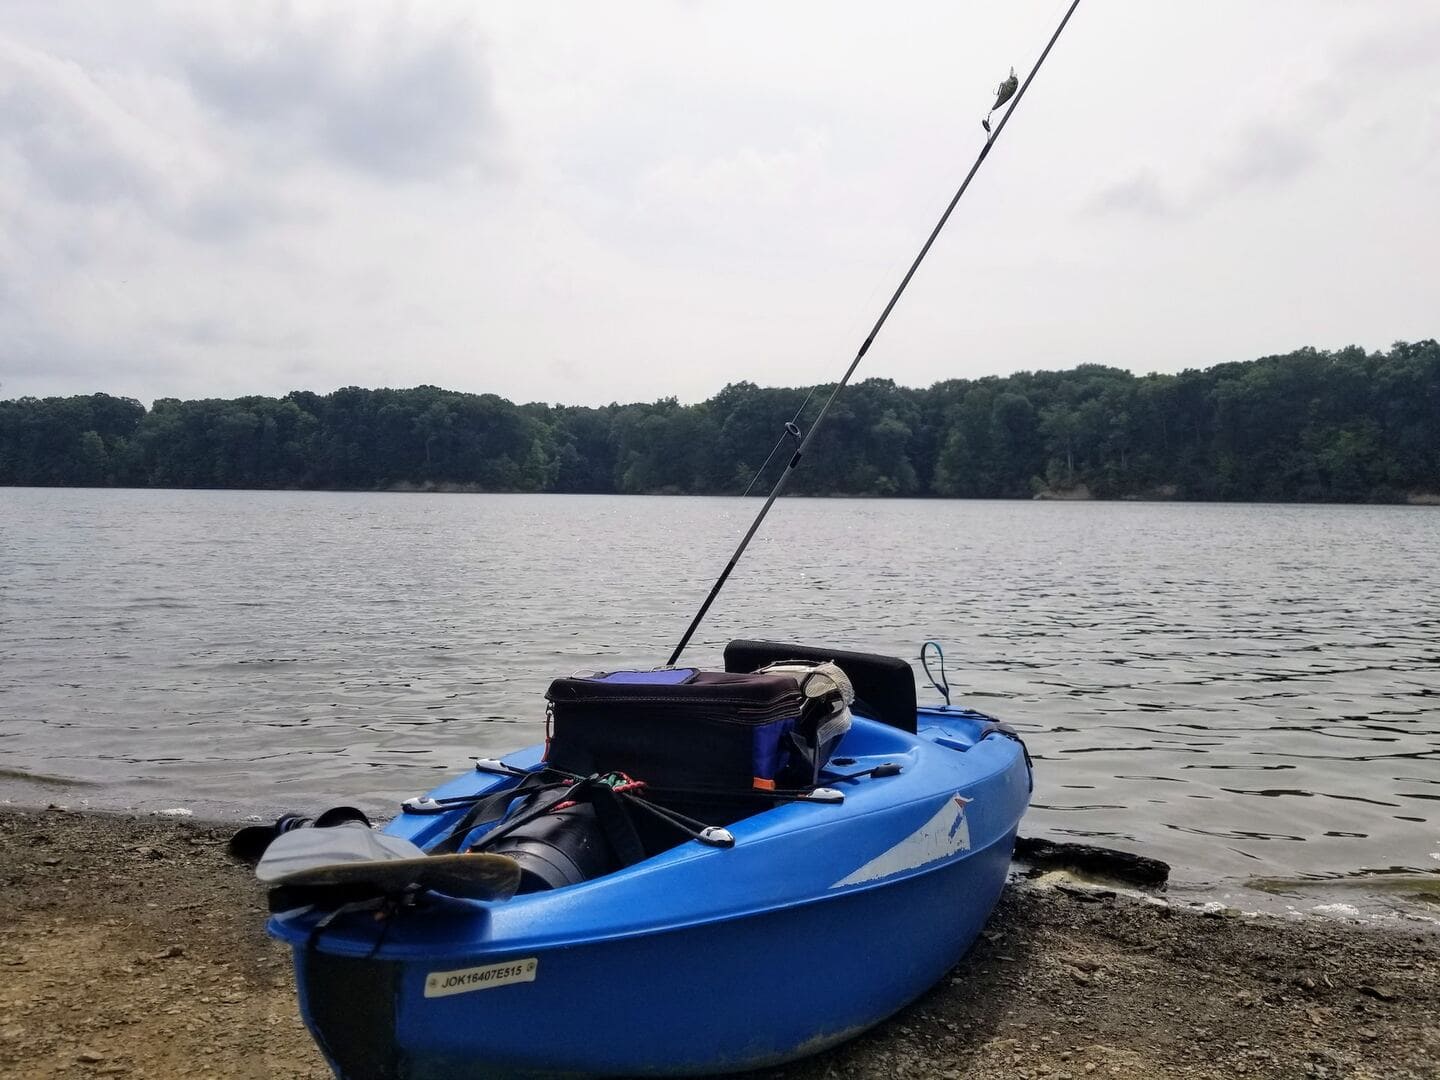 Carrying a cooler for kayak fishing